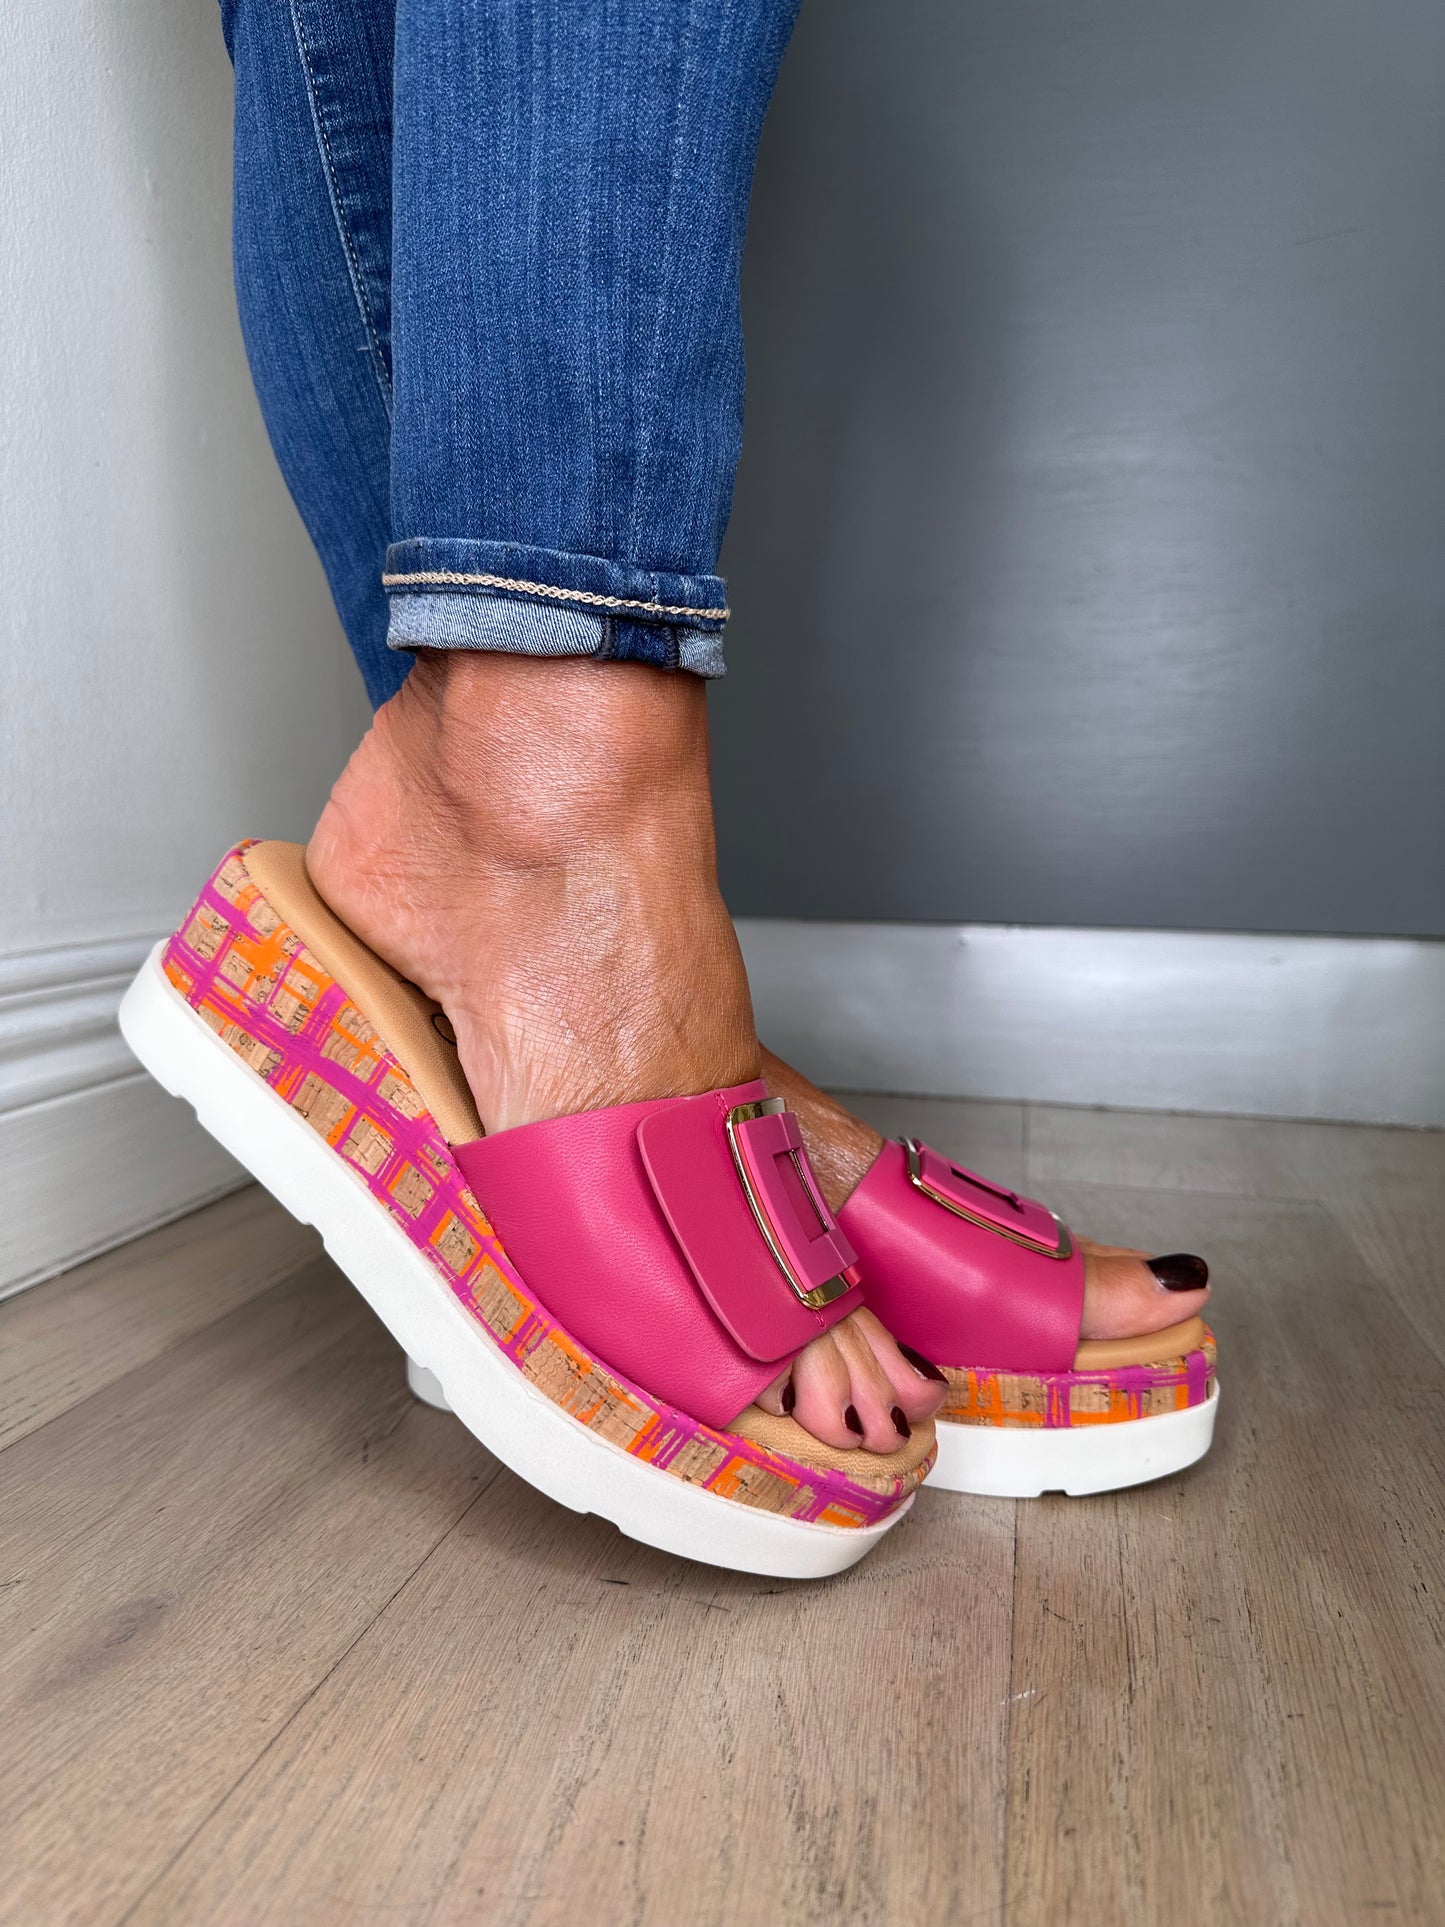 Repo -Pink Leather Slider With Patterned Wedge Sole